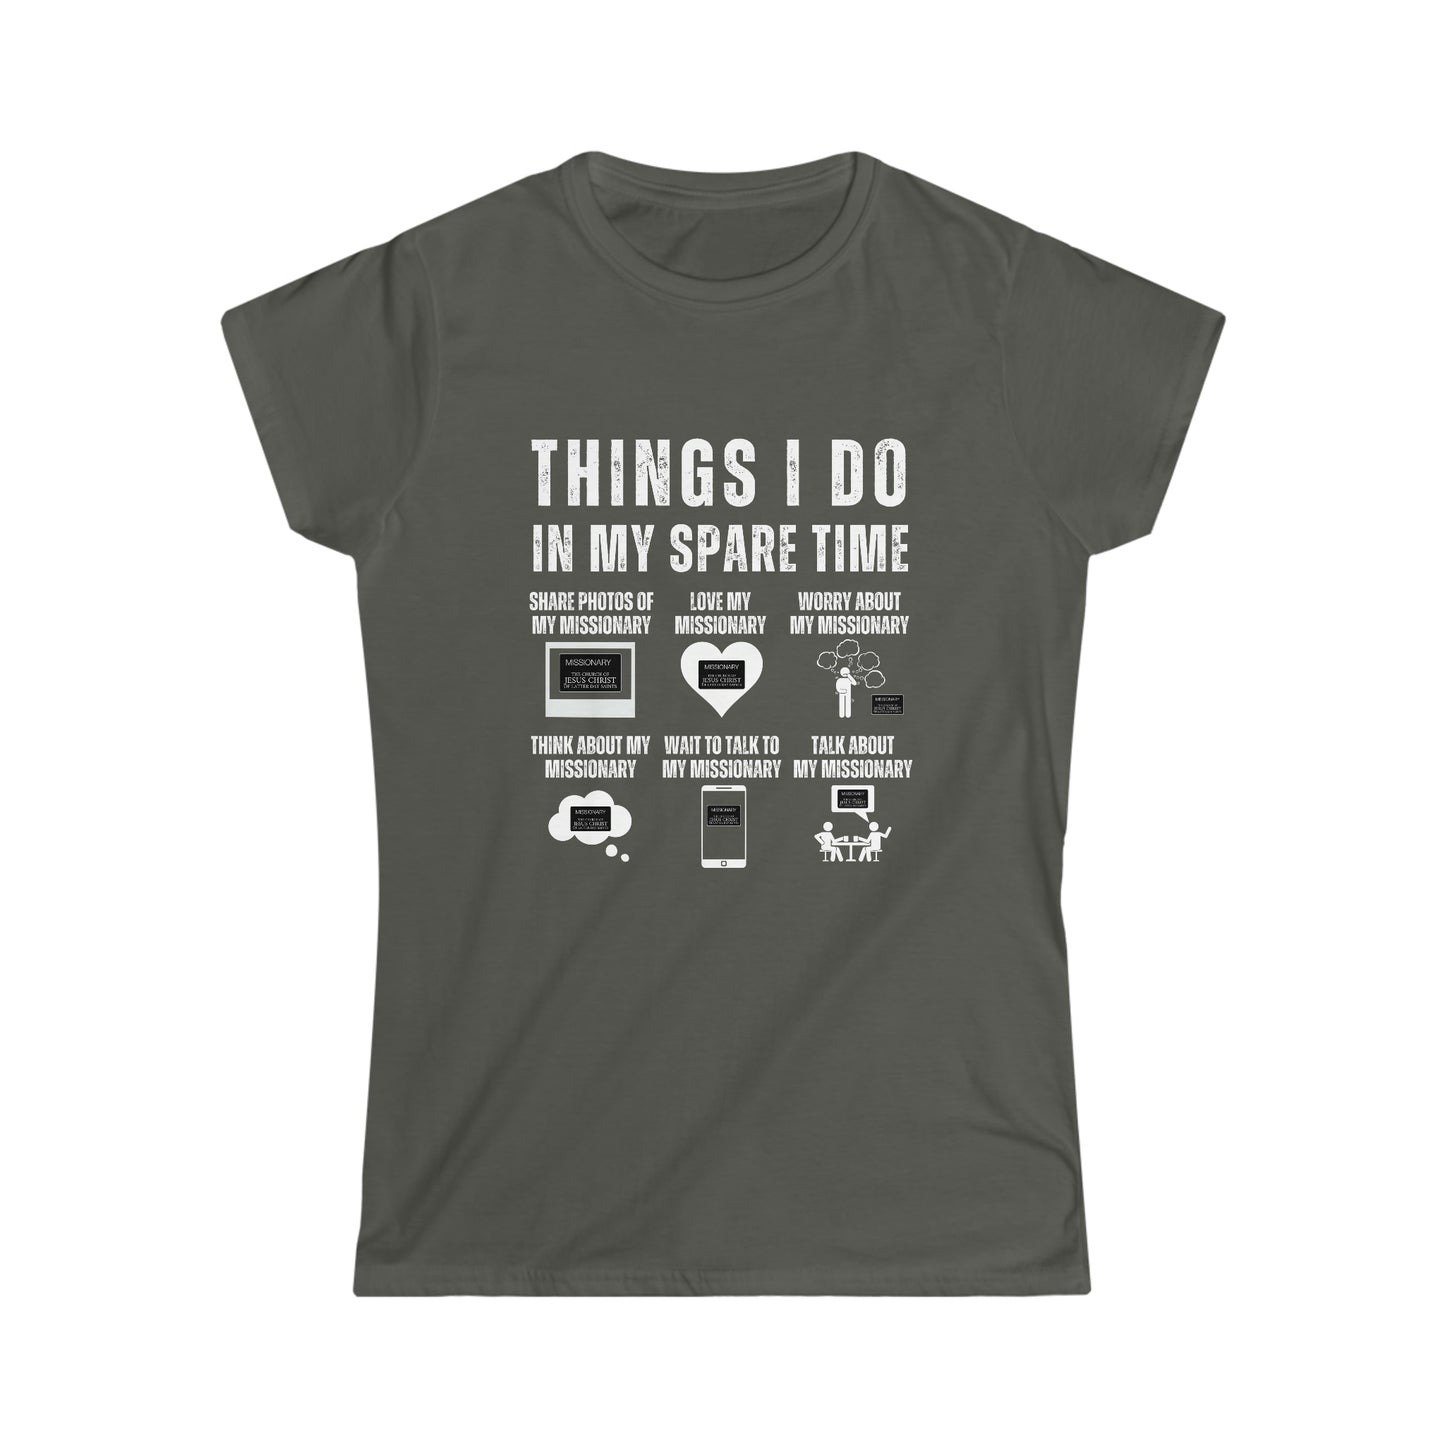 Women's Softstyle Tee, LDS Missionary